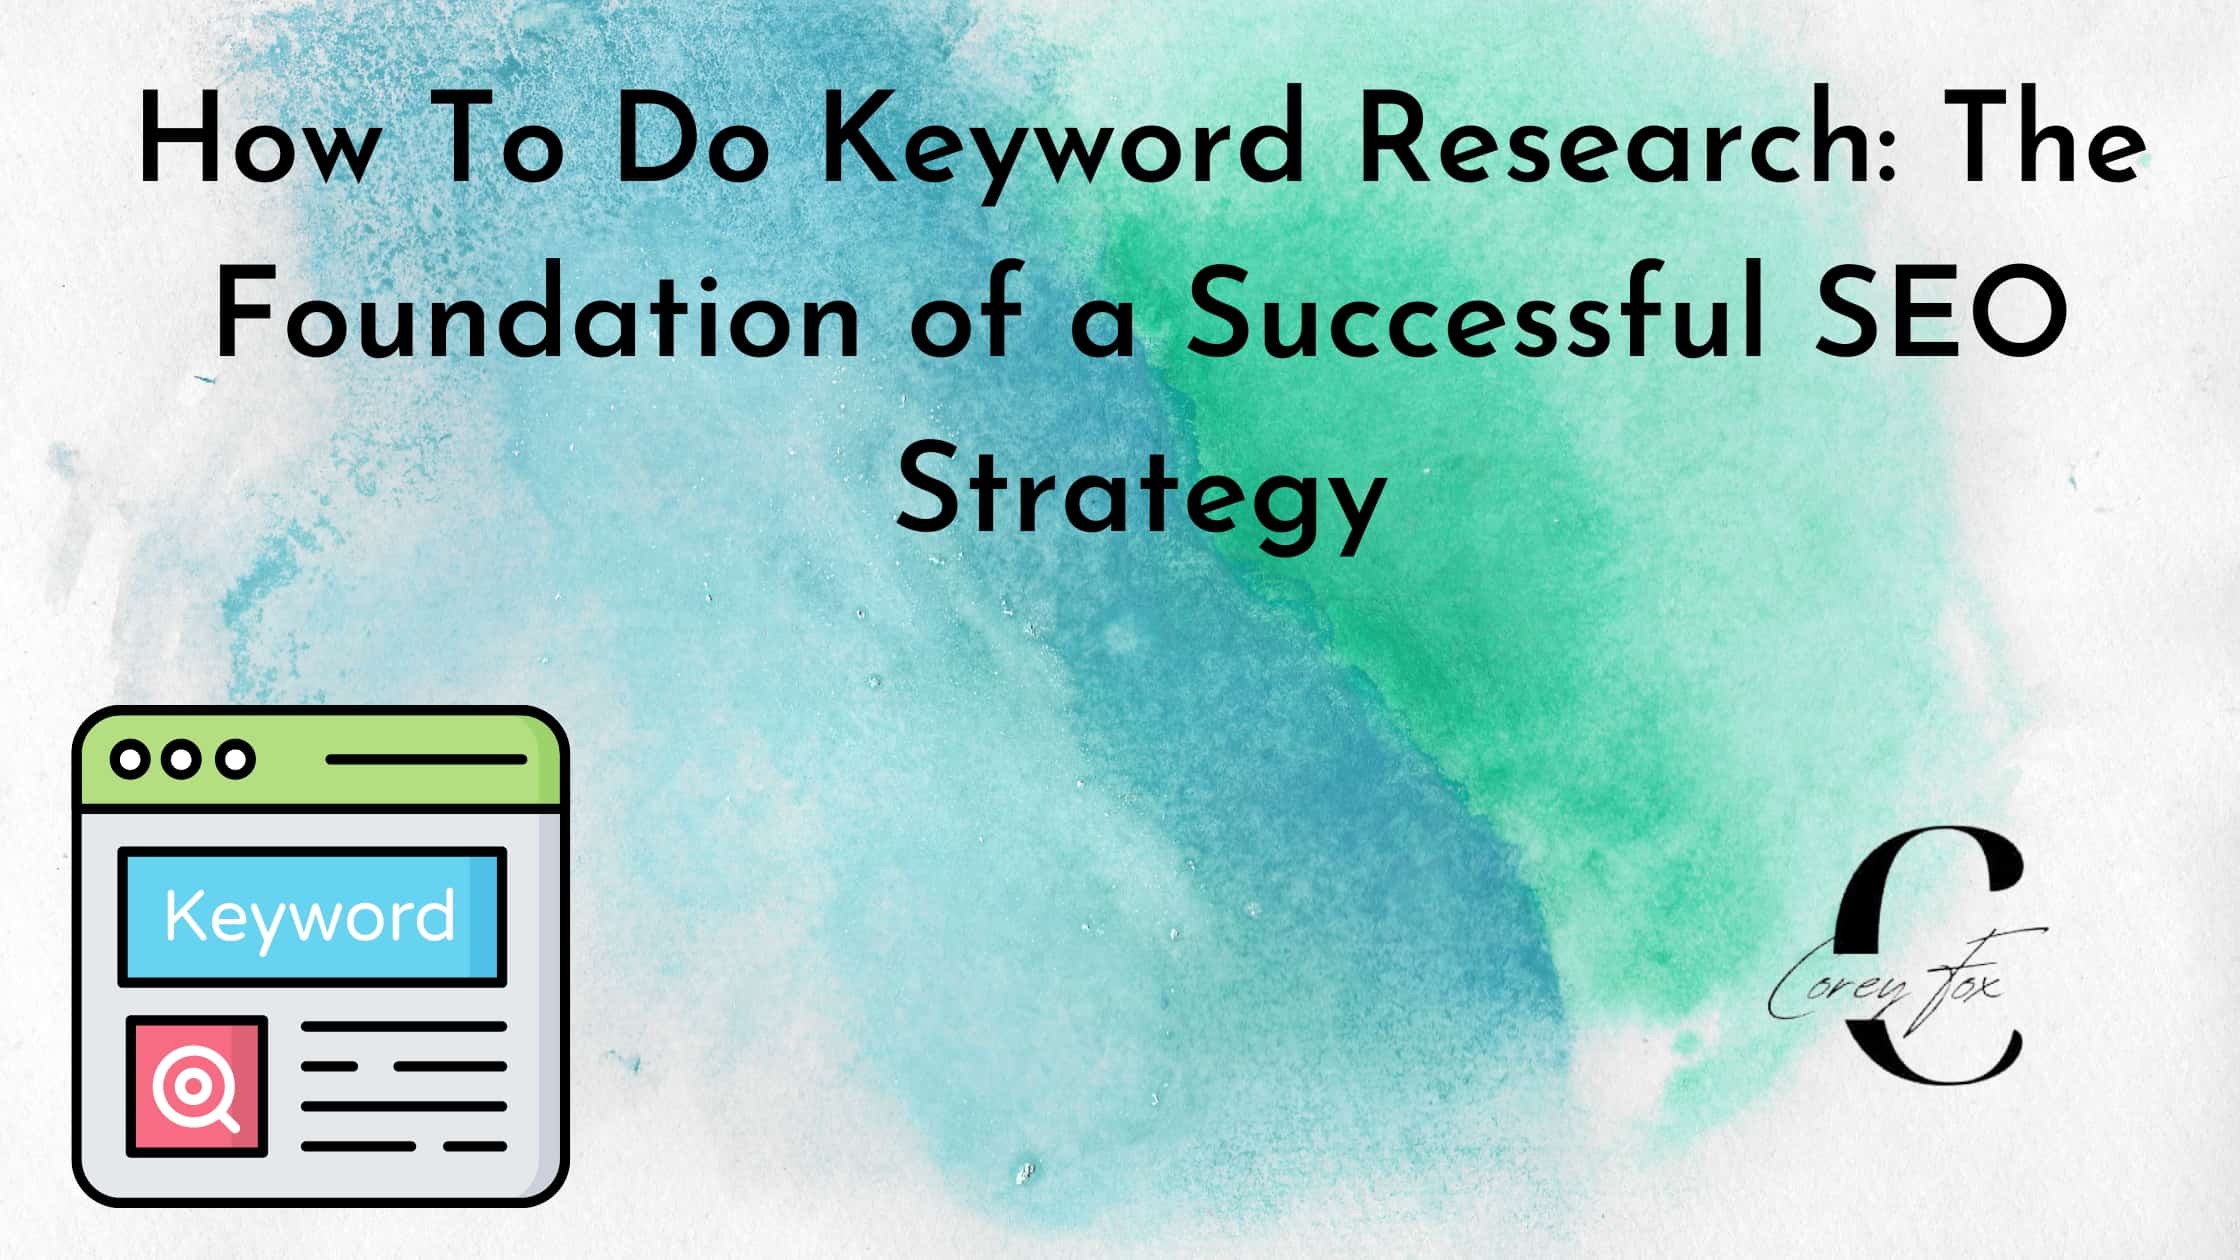 How to Do Keyword Research The Foundation of a Successful SEO Strategy